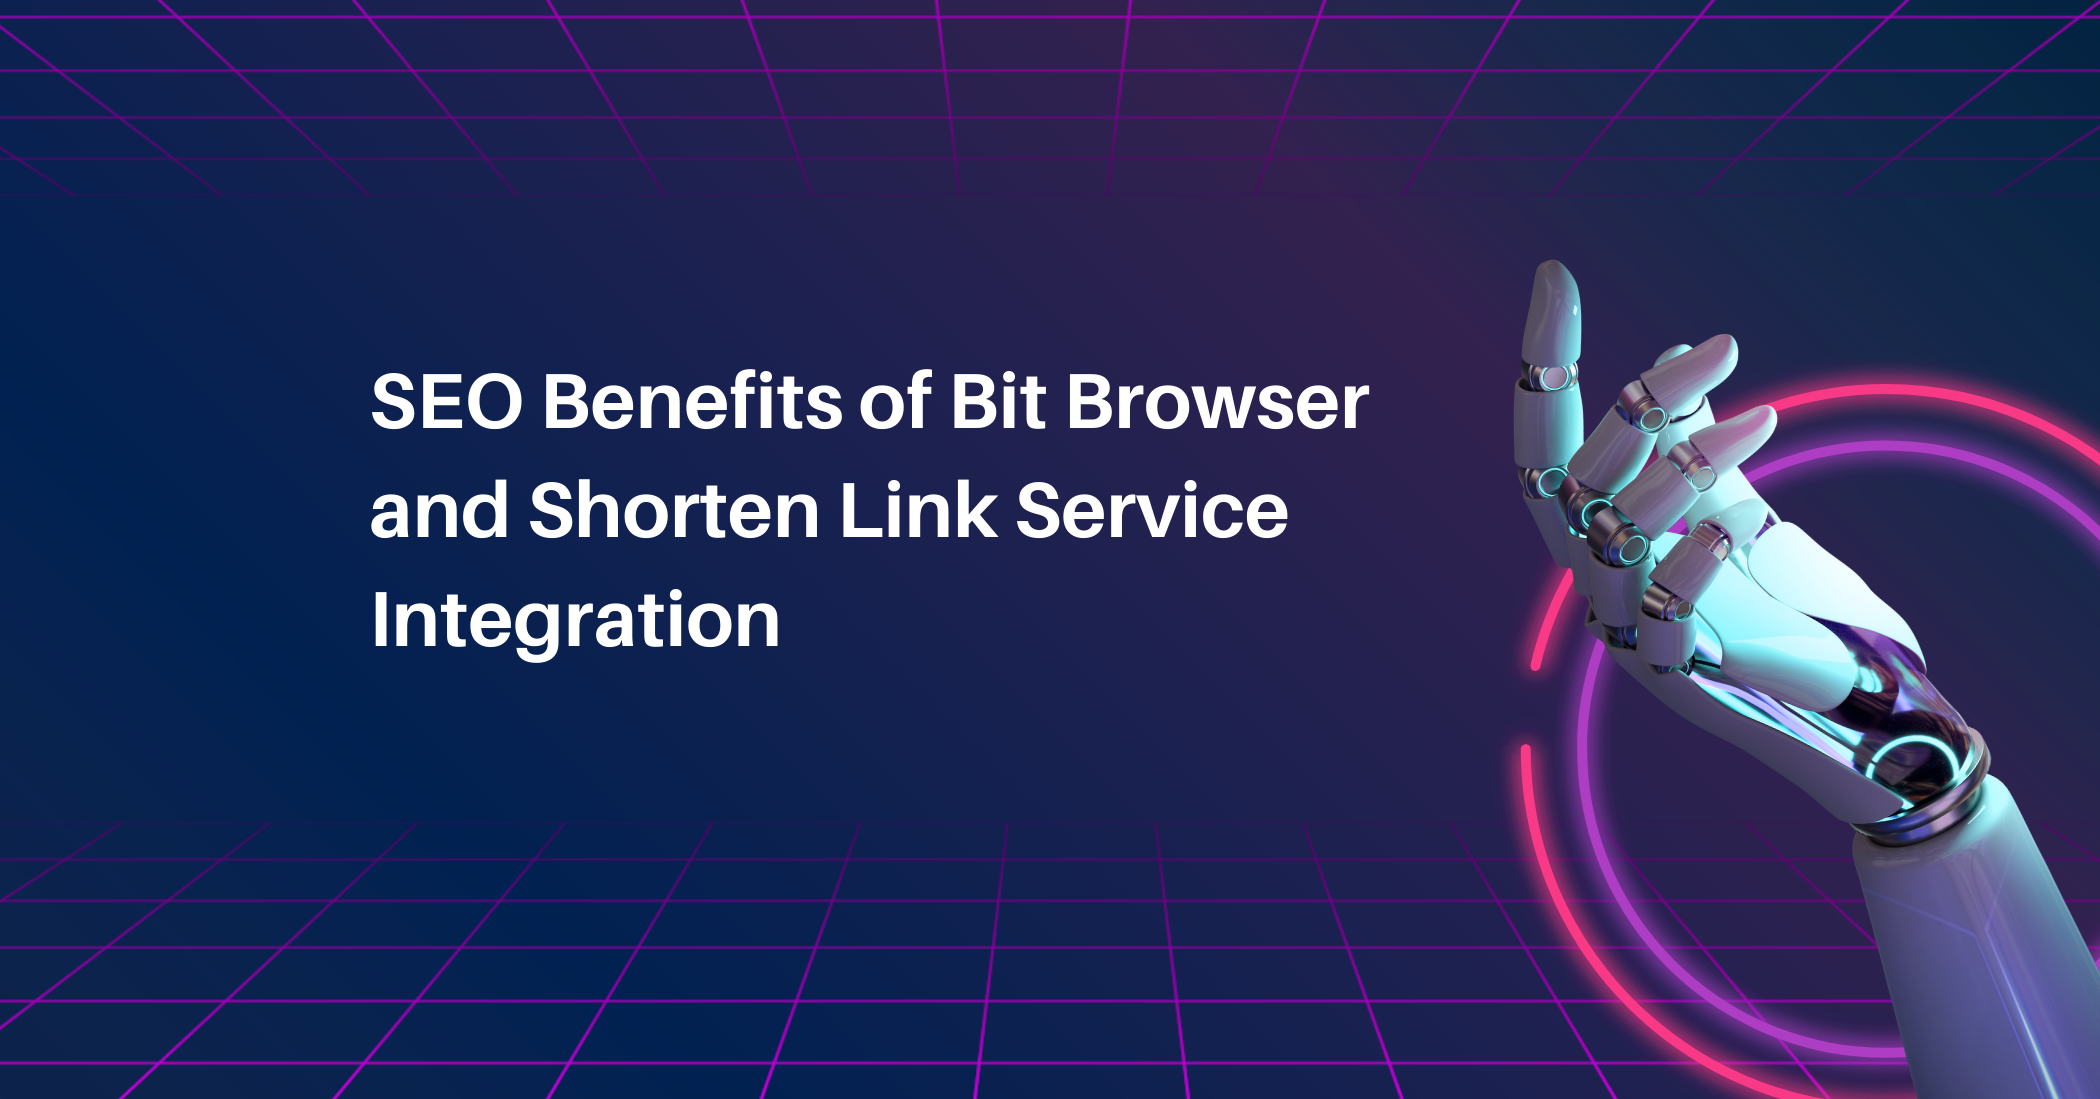 Bit Browser and Shorten Link Service - A Revolution in Web Browsing and Content Sharing